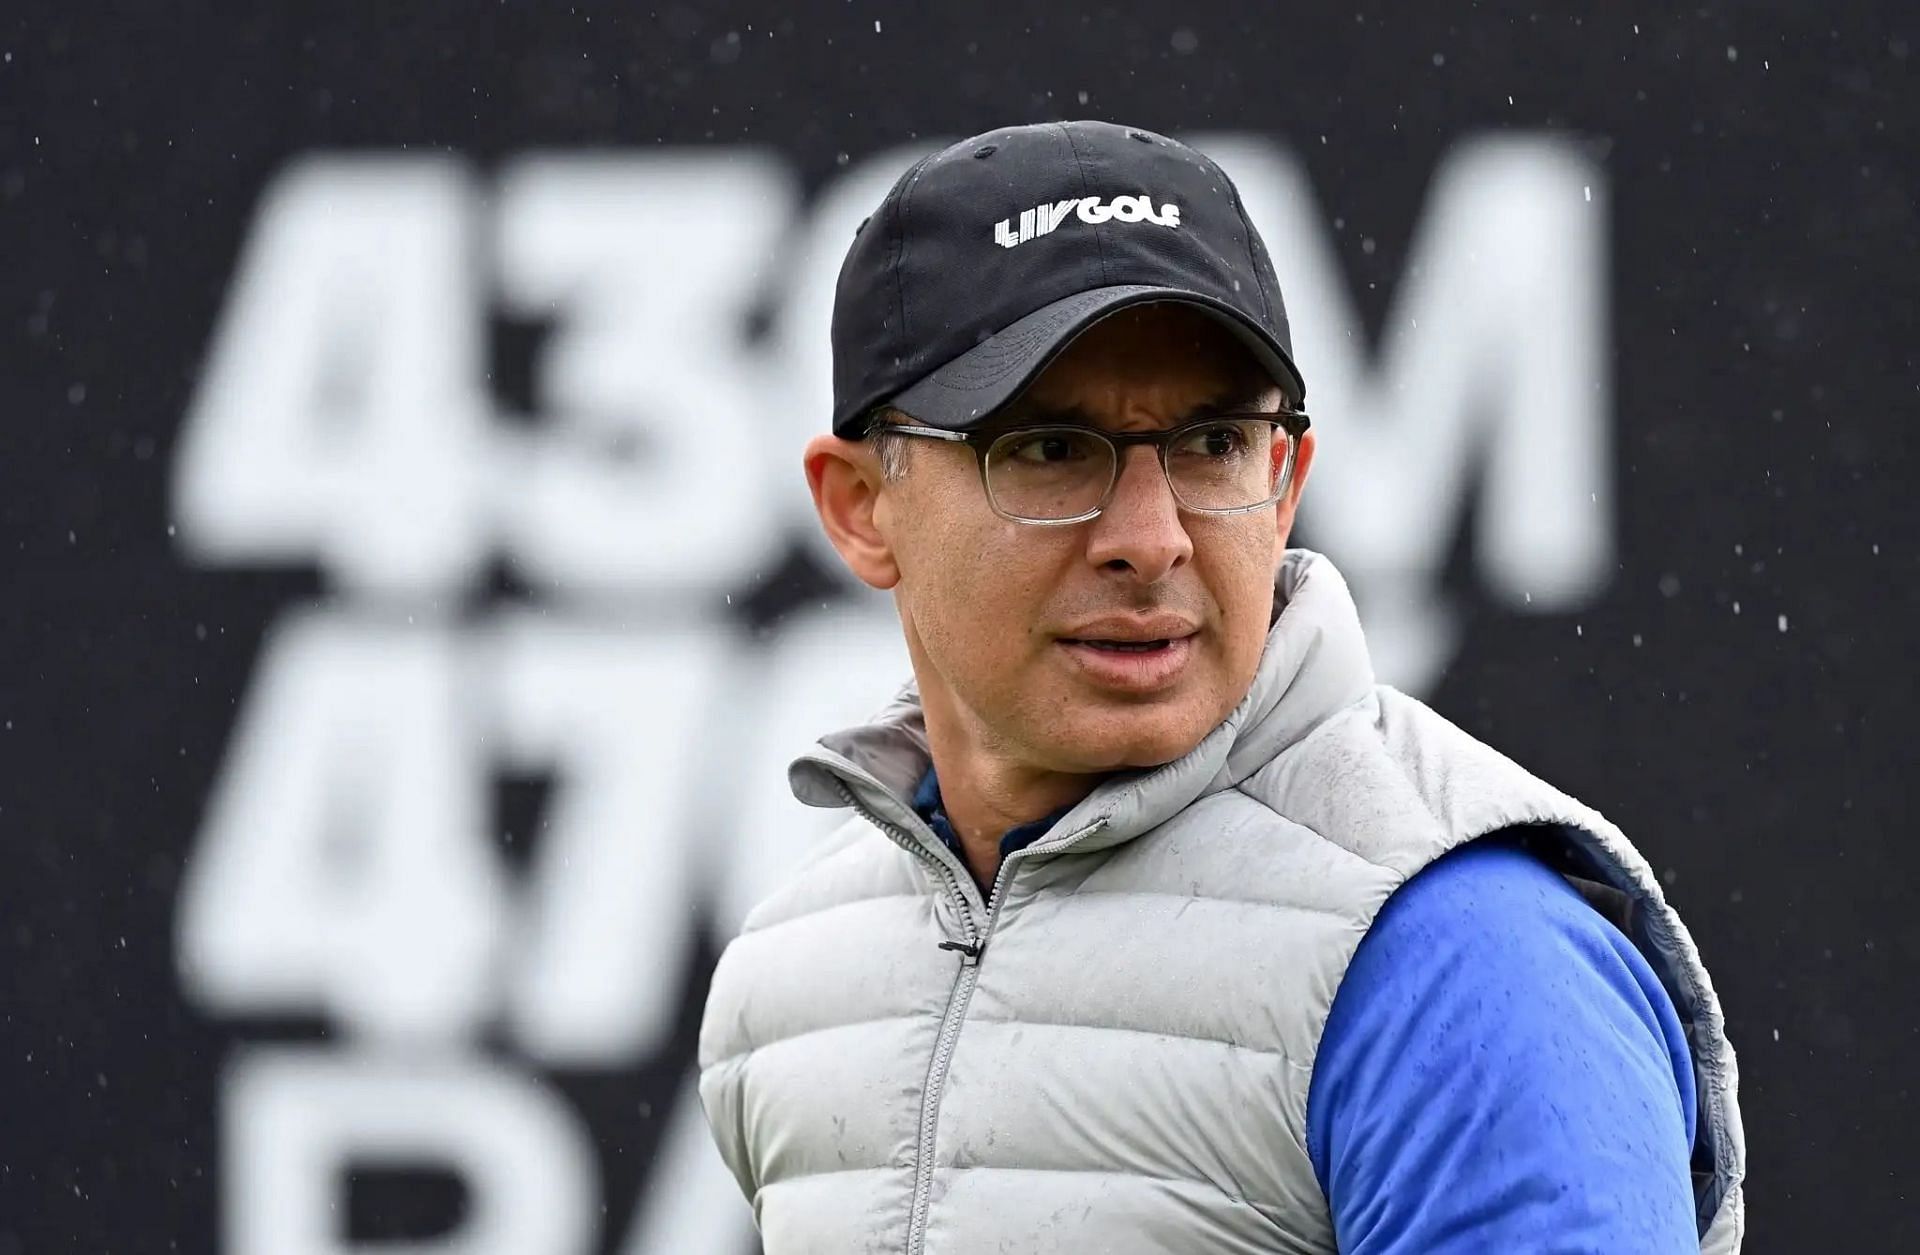 LIV Golf Chief Operating Officer Atul Khosla leaves tour ahead of the second season 